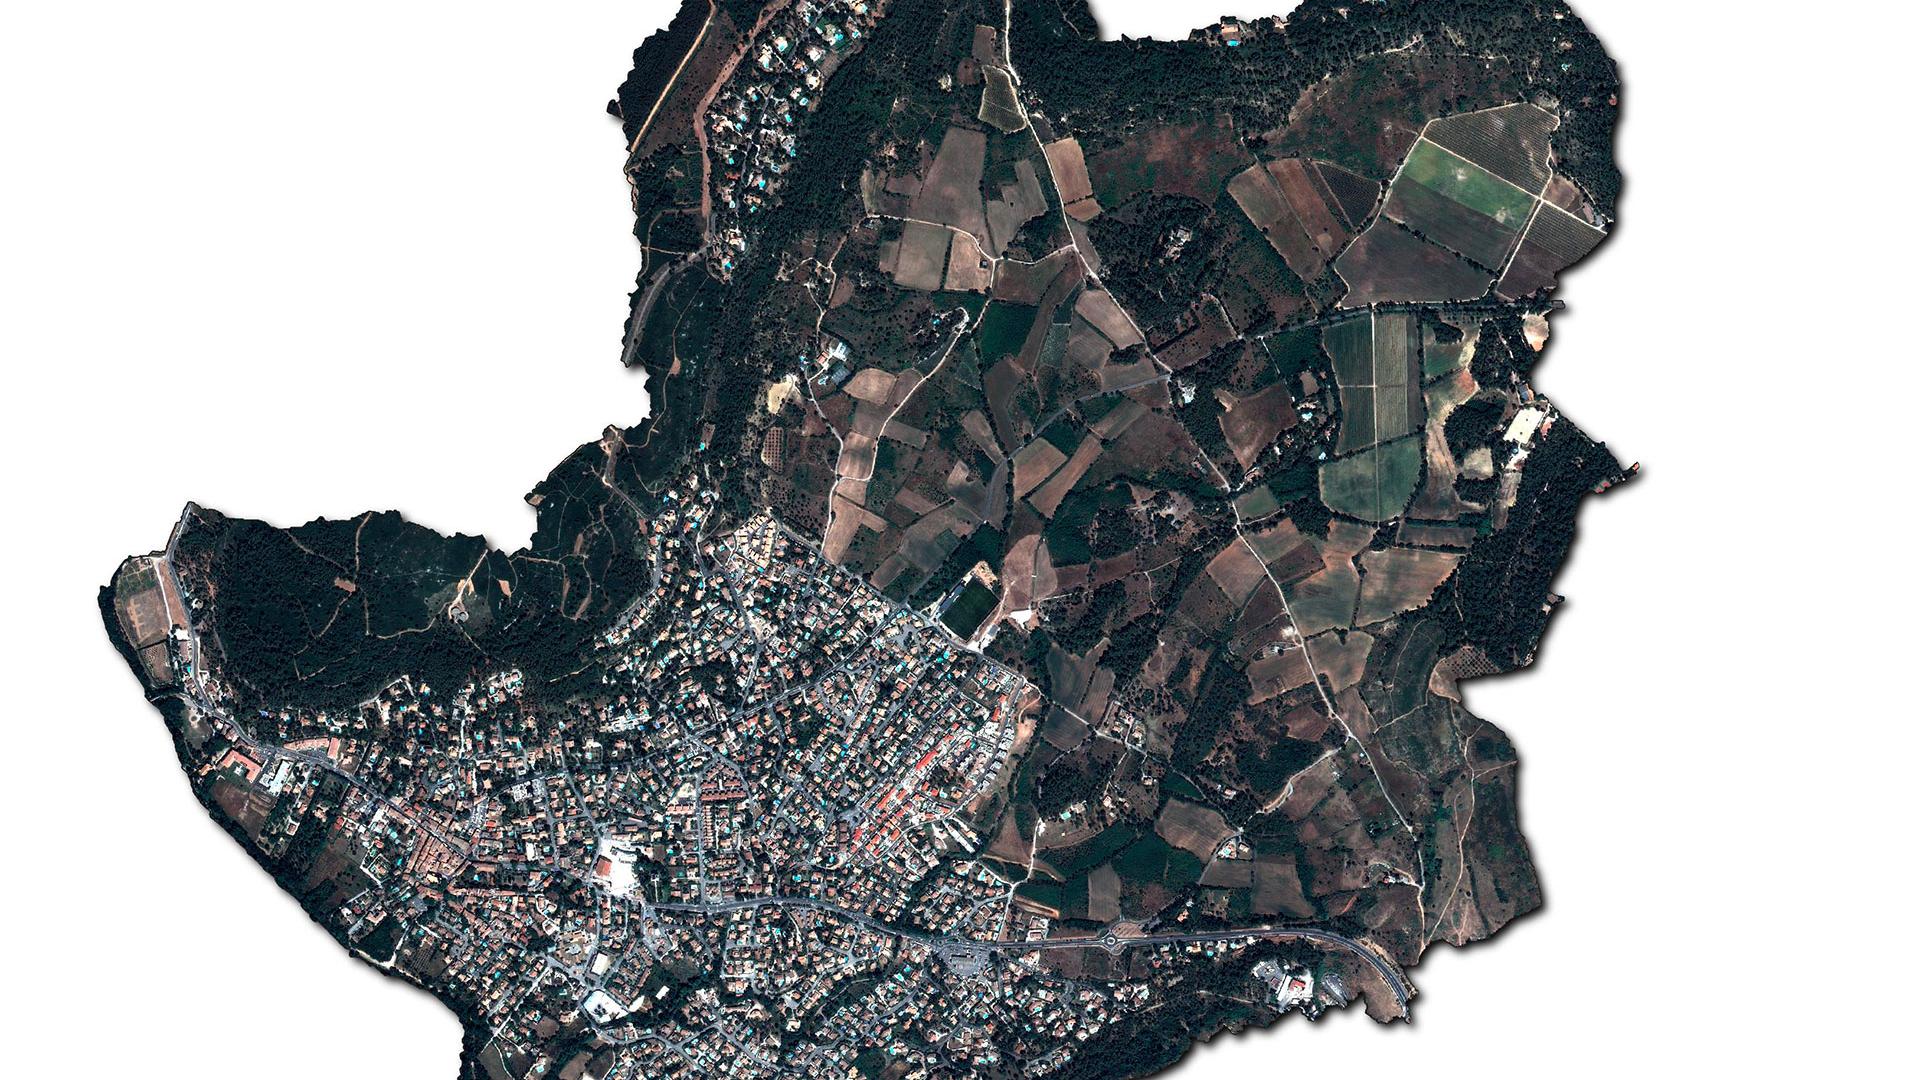 Study area encompassing the town of Grabel and the Rieumassel catchment on a Pleiades image acquired 9 months after the 2014 flood.